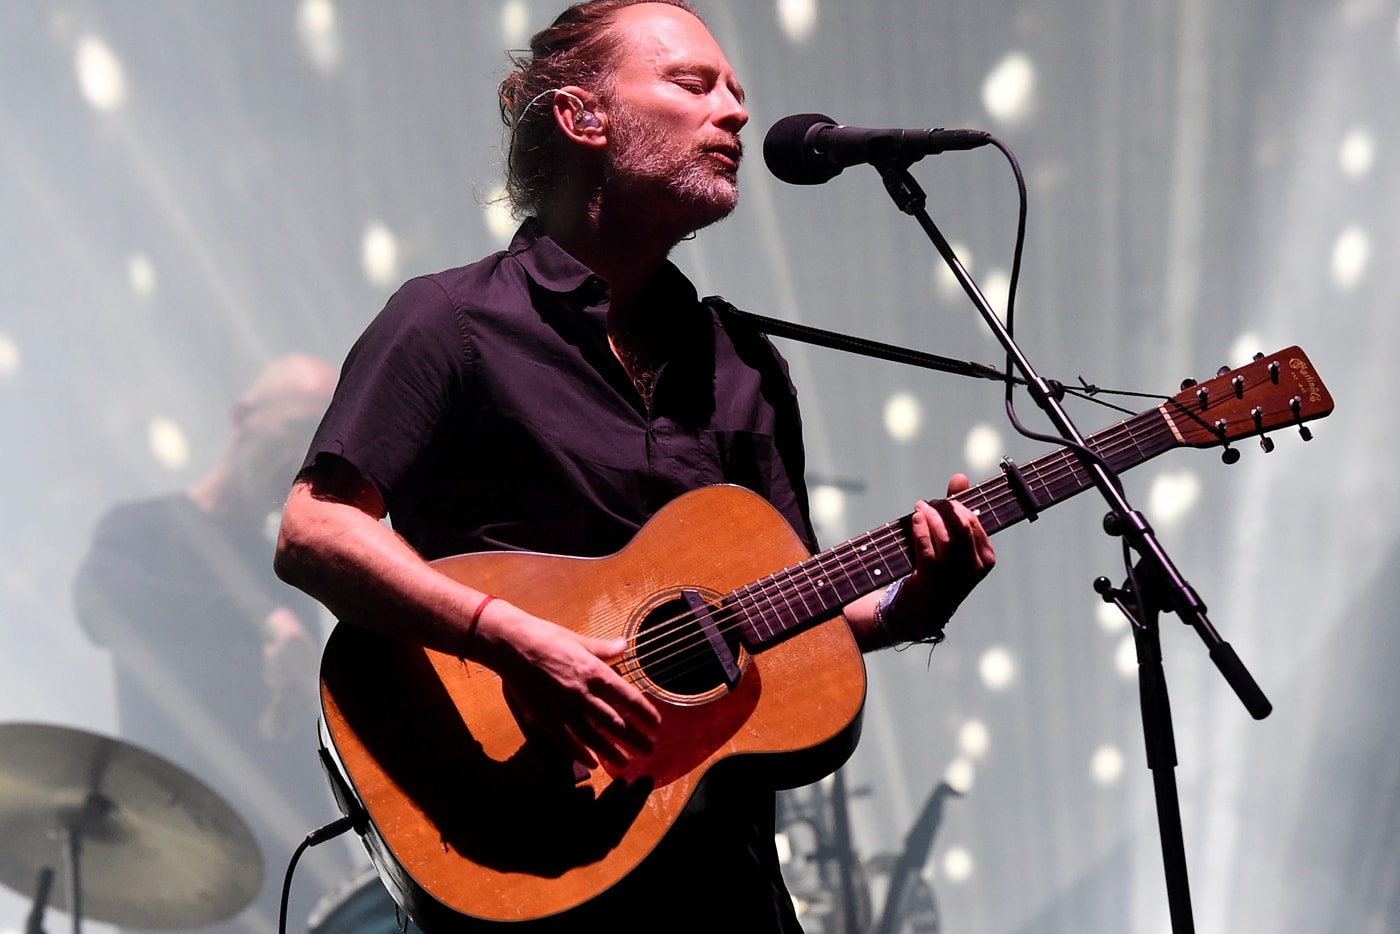 Thom Yorke Atoms for Peace B Sides Hearing Damage Stream Tomorrow’s Modern Boxes Tour dates